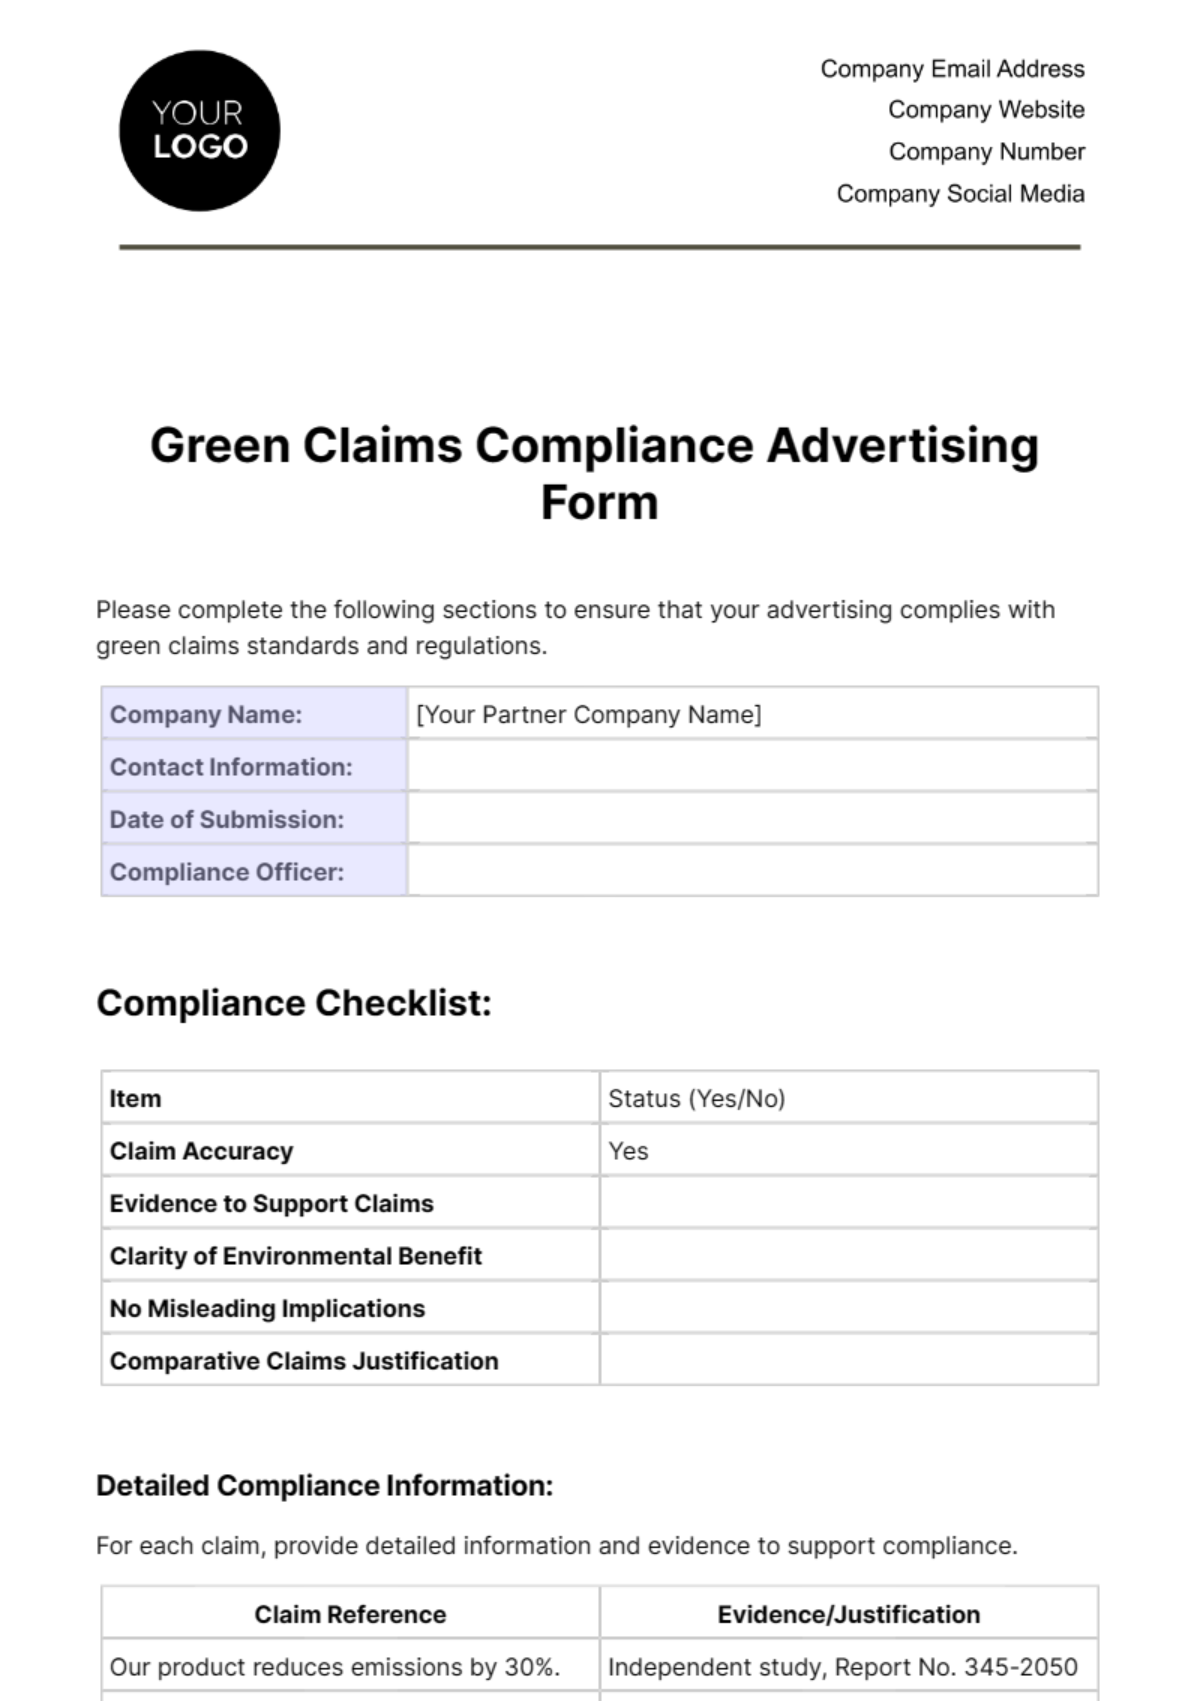 Green Claims Compliance Advertising Form Template